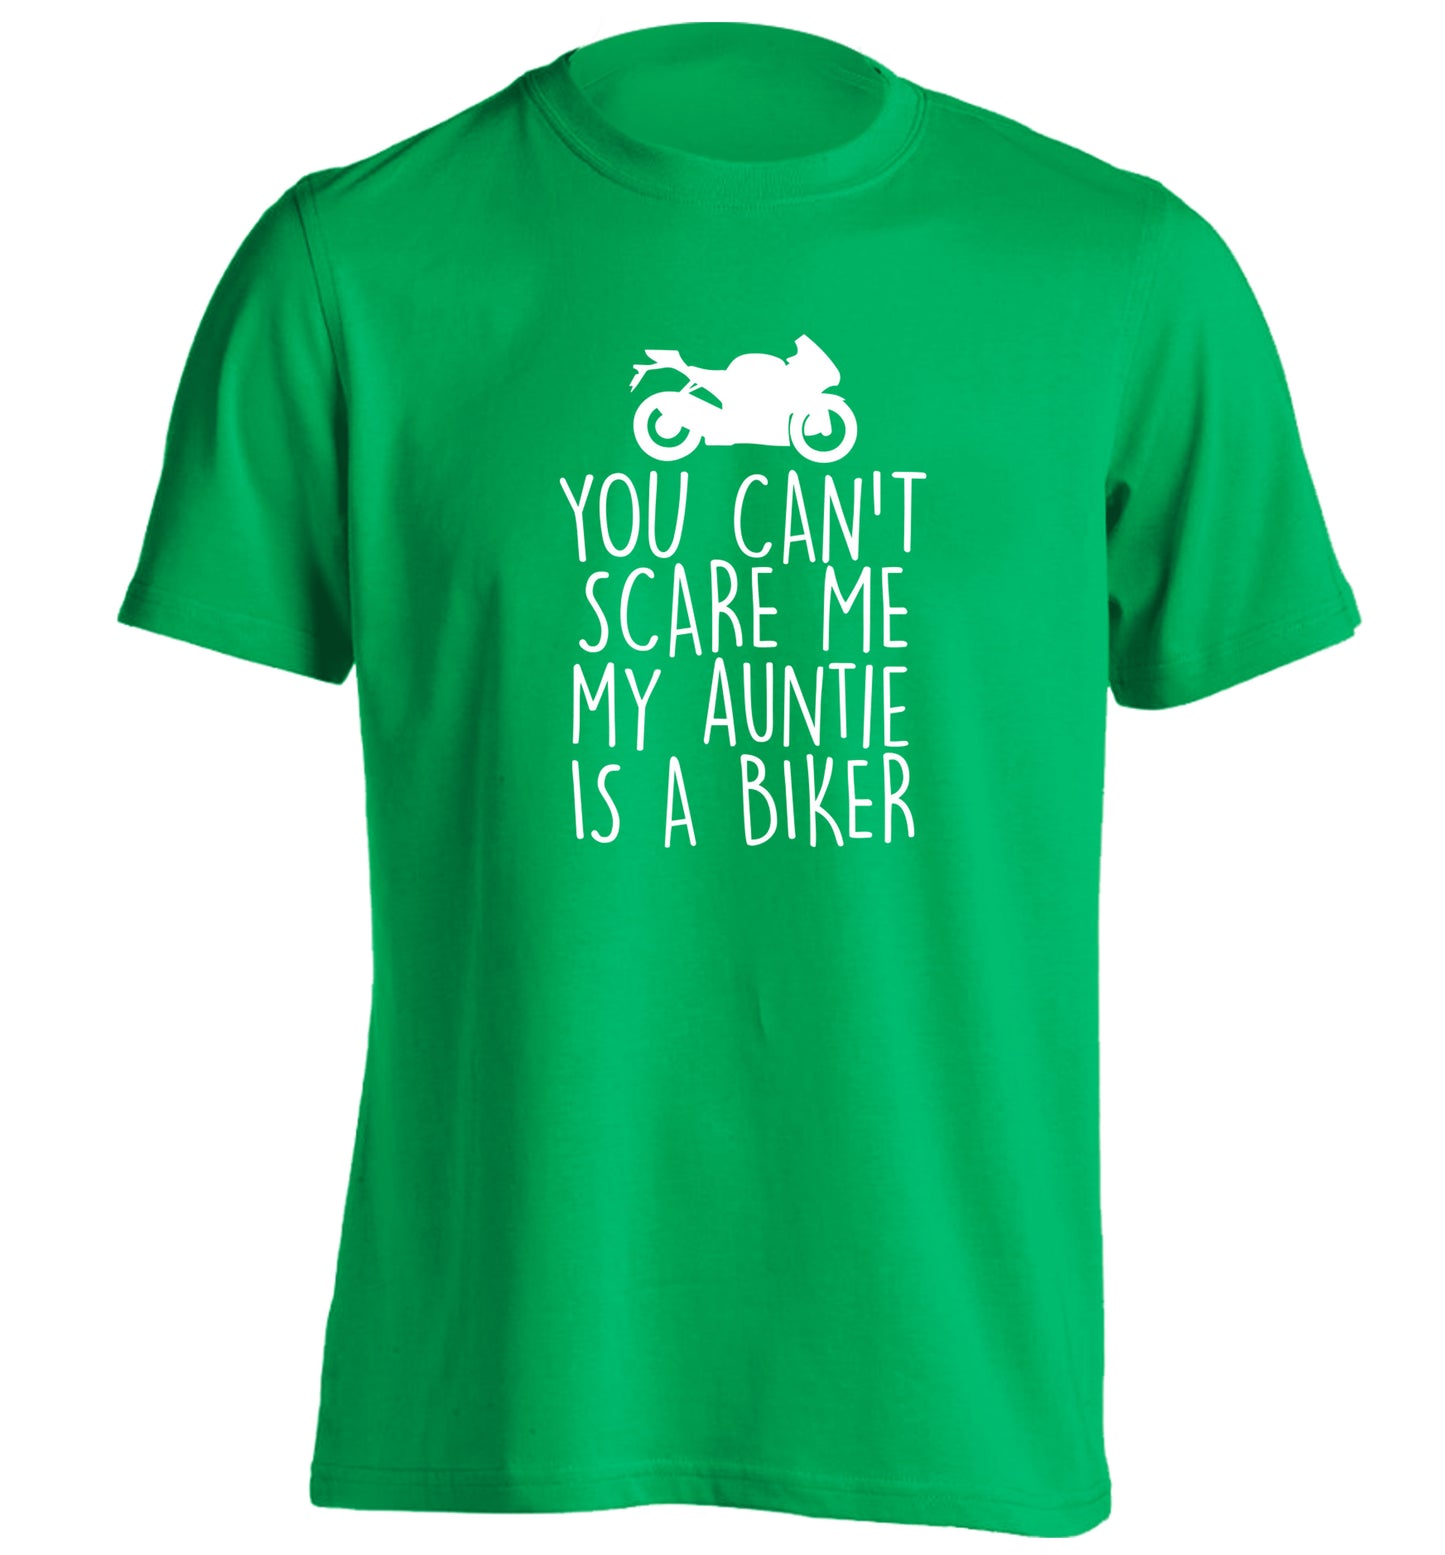 You can't scare me my auntie is a biker adults unisex green Tshirt 2XL